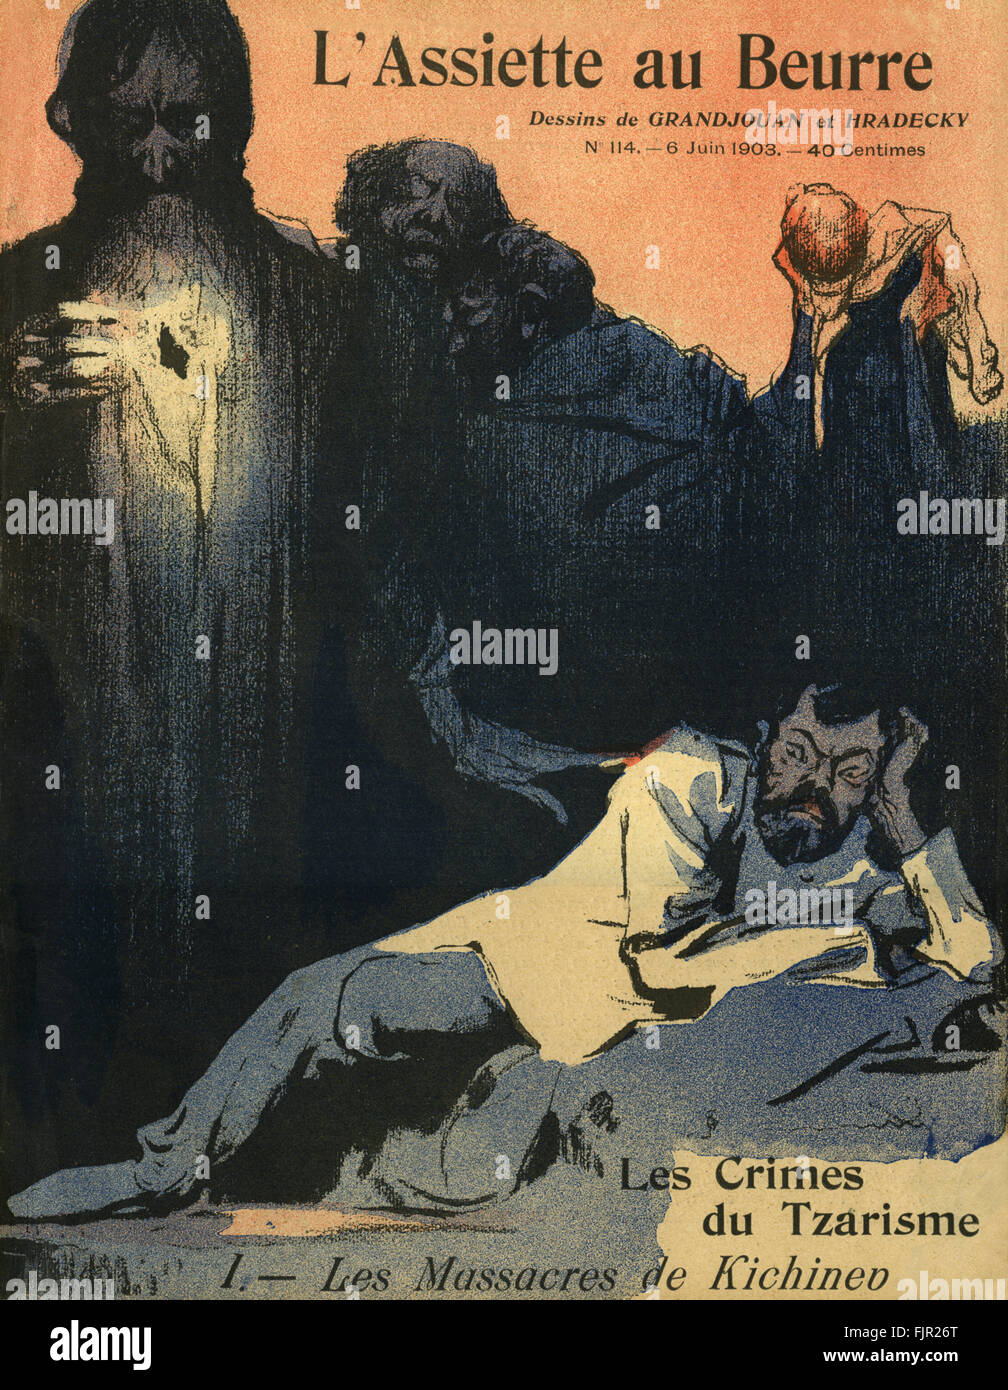 L'Assiette au Beurre cover - The Crimes of Tsarism and the massacres of Kishinev / Chisinau (April 1903).  Illustration by V Hradecky. Stock Photo